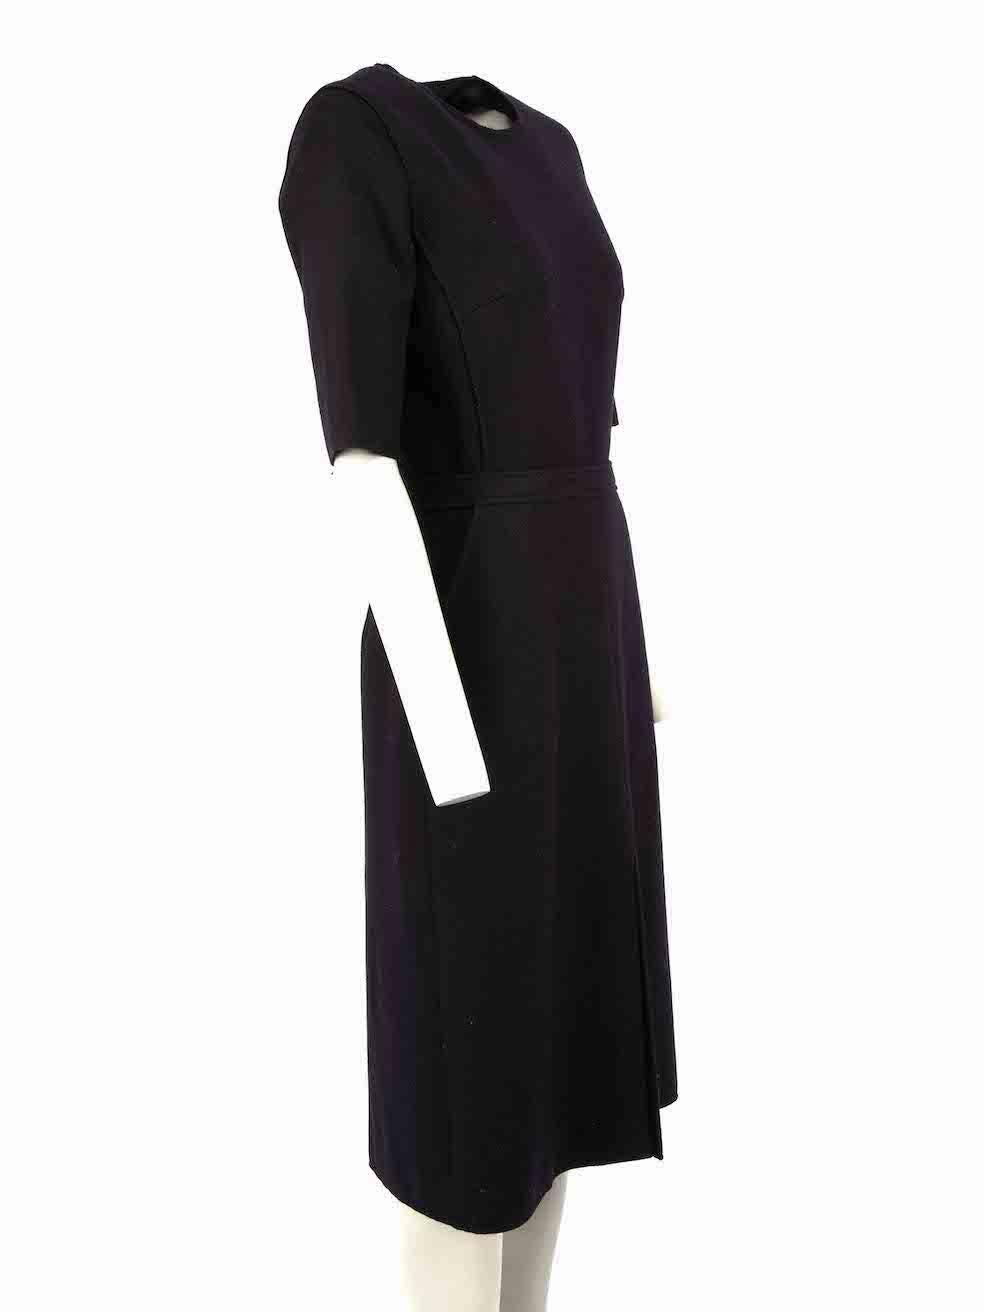 CONDITION is Very good. Hardly any visible wear to dress is evident on this used Victoria Victoria Beckham designer resale item.

 Details
 Navy
 Wool
 Midi dress
 Round neckline
 2x Front side pockets
 Back zip closure with hook and eye

 Made in